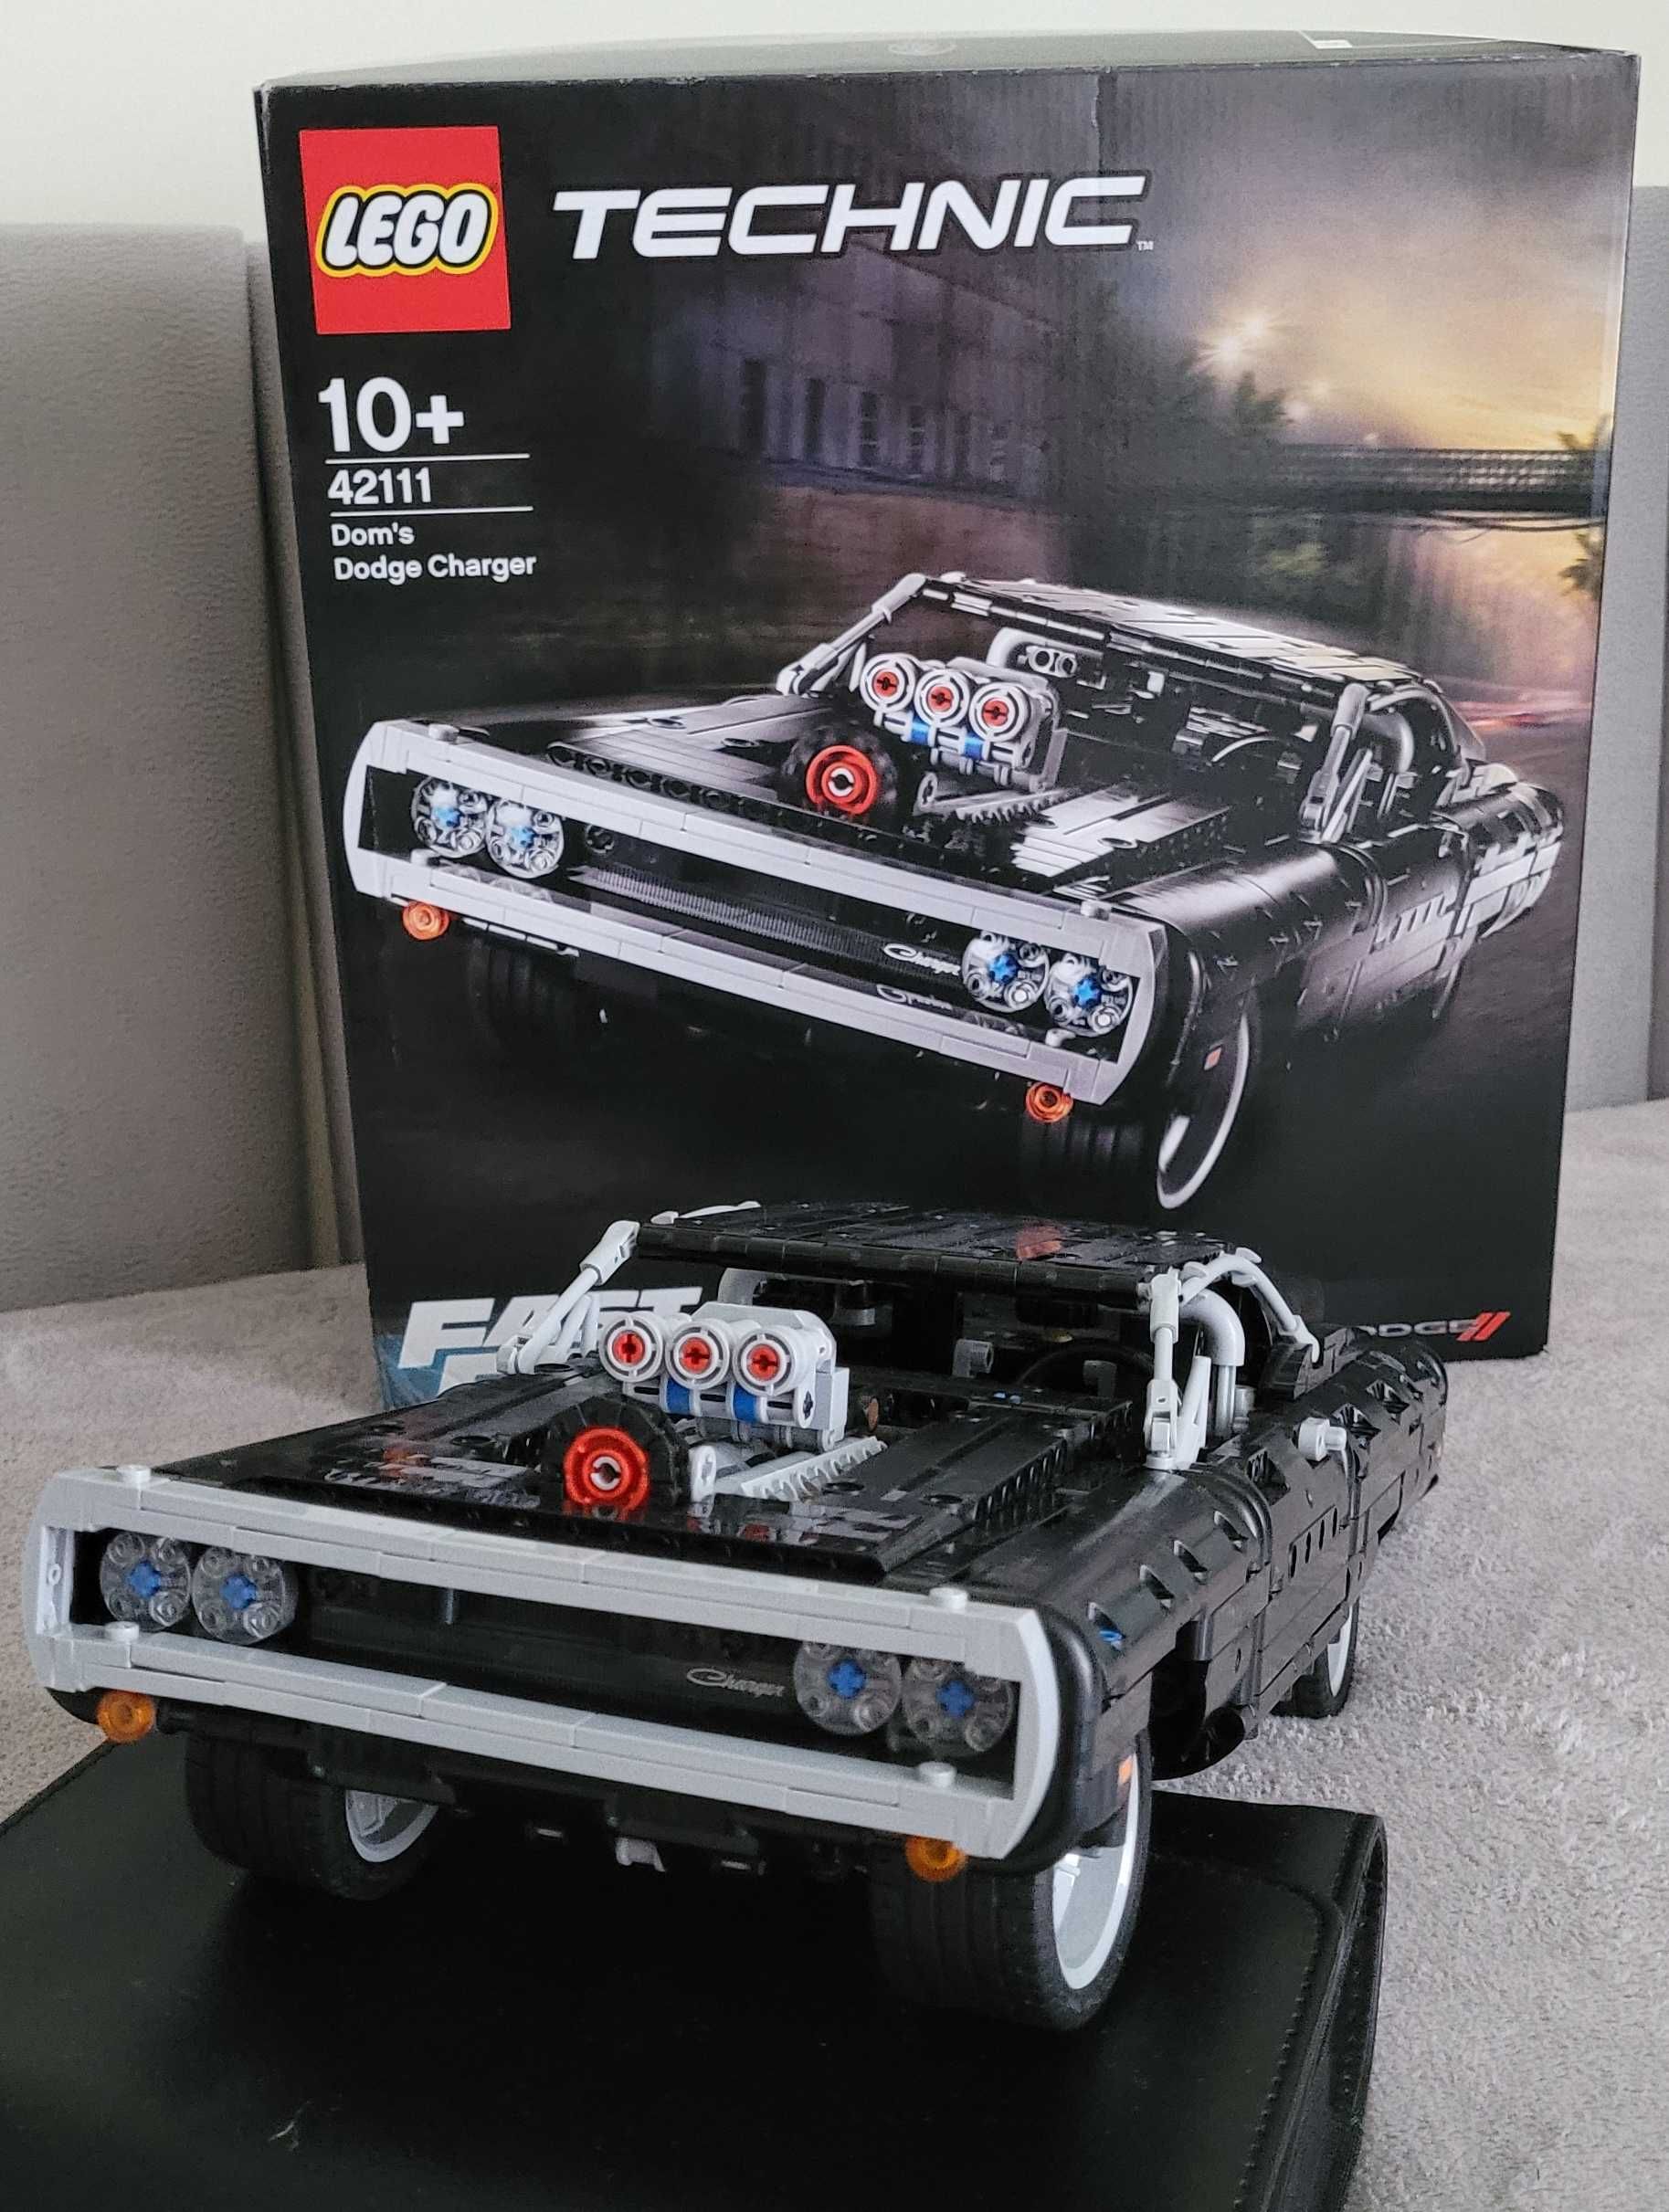 Lego Technic 42111, Dom's Dodge Charger